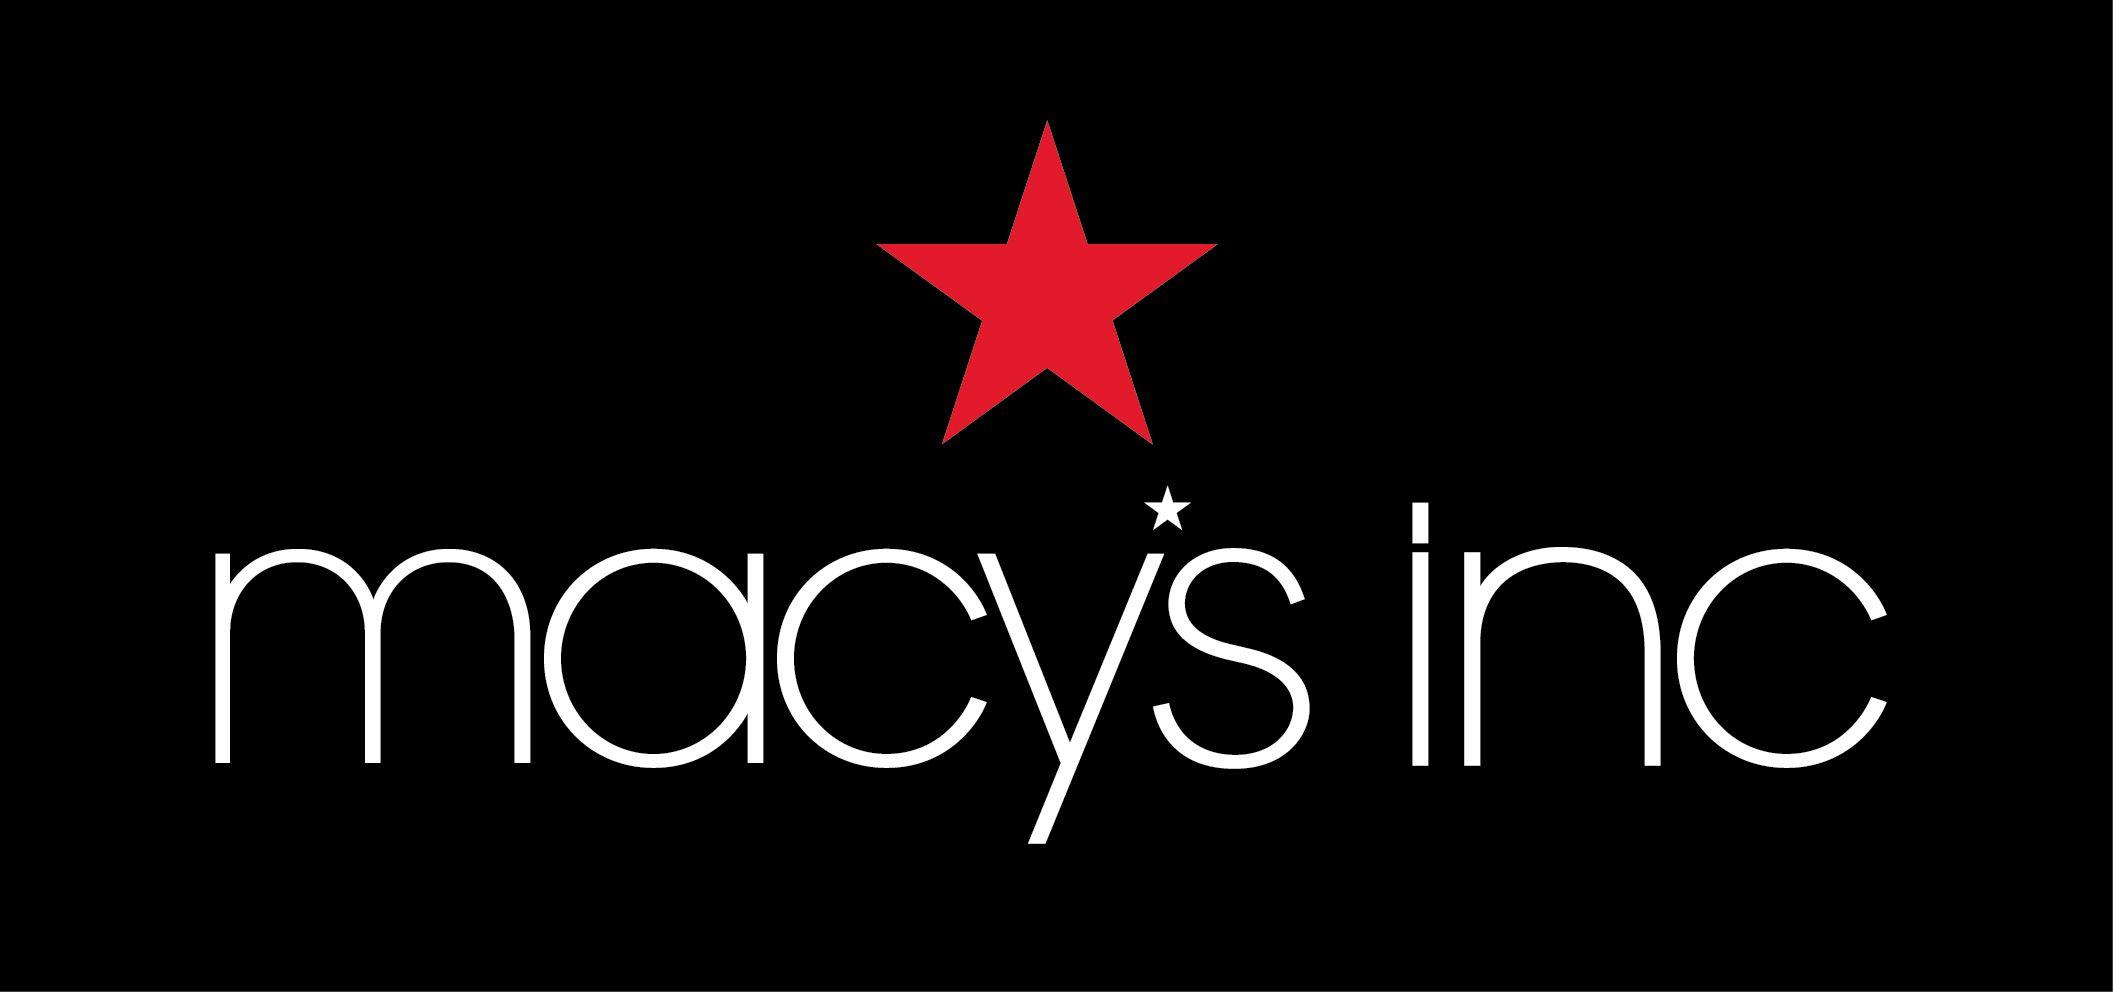 Macy's Red Star Logo - Macy's to close 35 to 40 underperforming stores in early 2016 ...